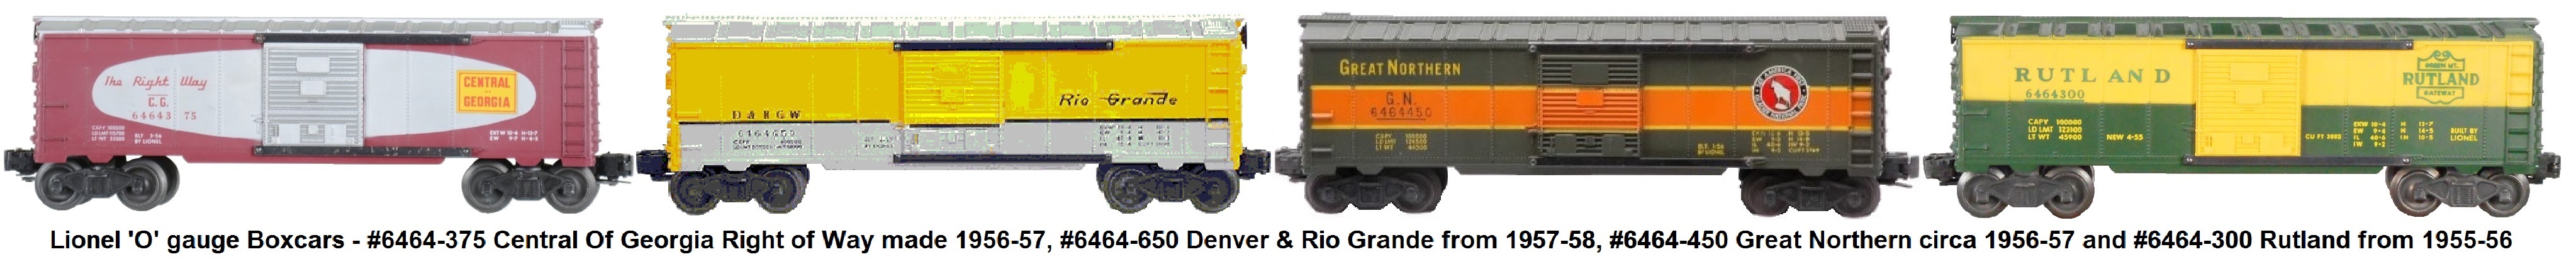 Lionel 6464 series box cars from the post-war era.